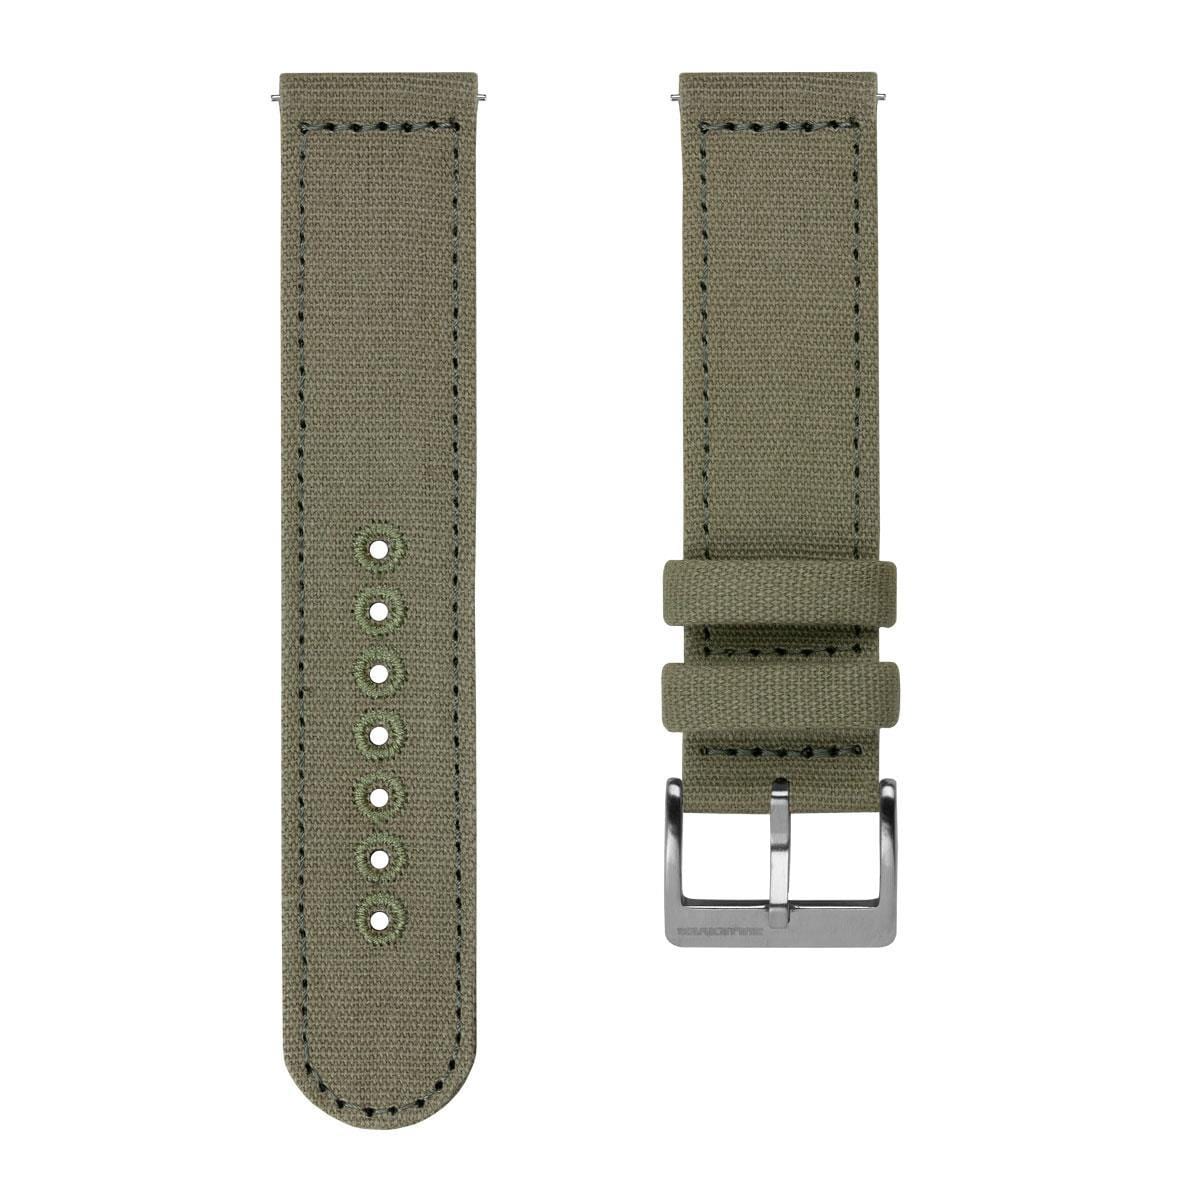 ZULUDIVER Croyde 2 Piece Canvas Quick-Release Watch Strap - Army Green